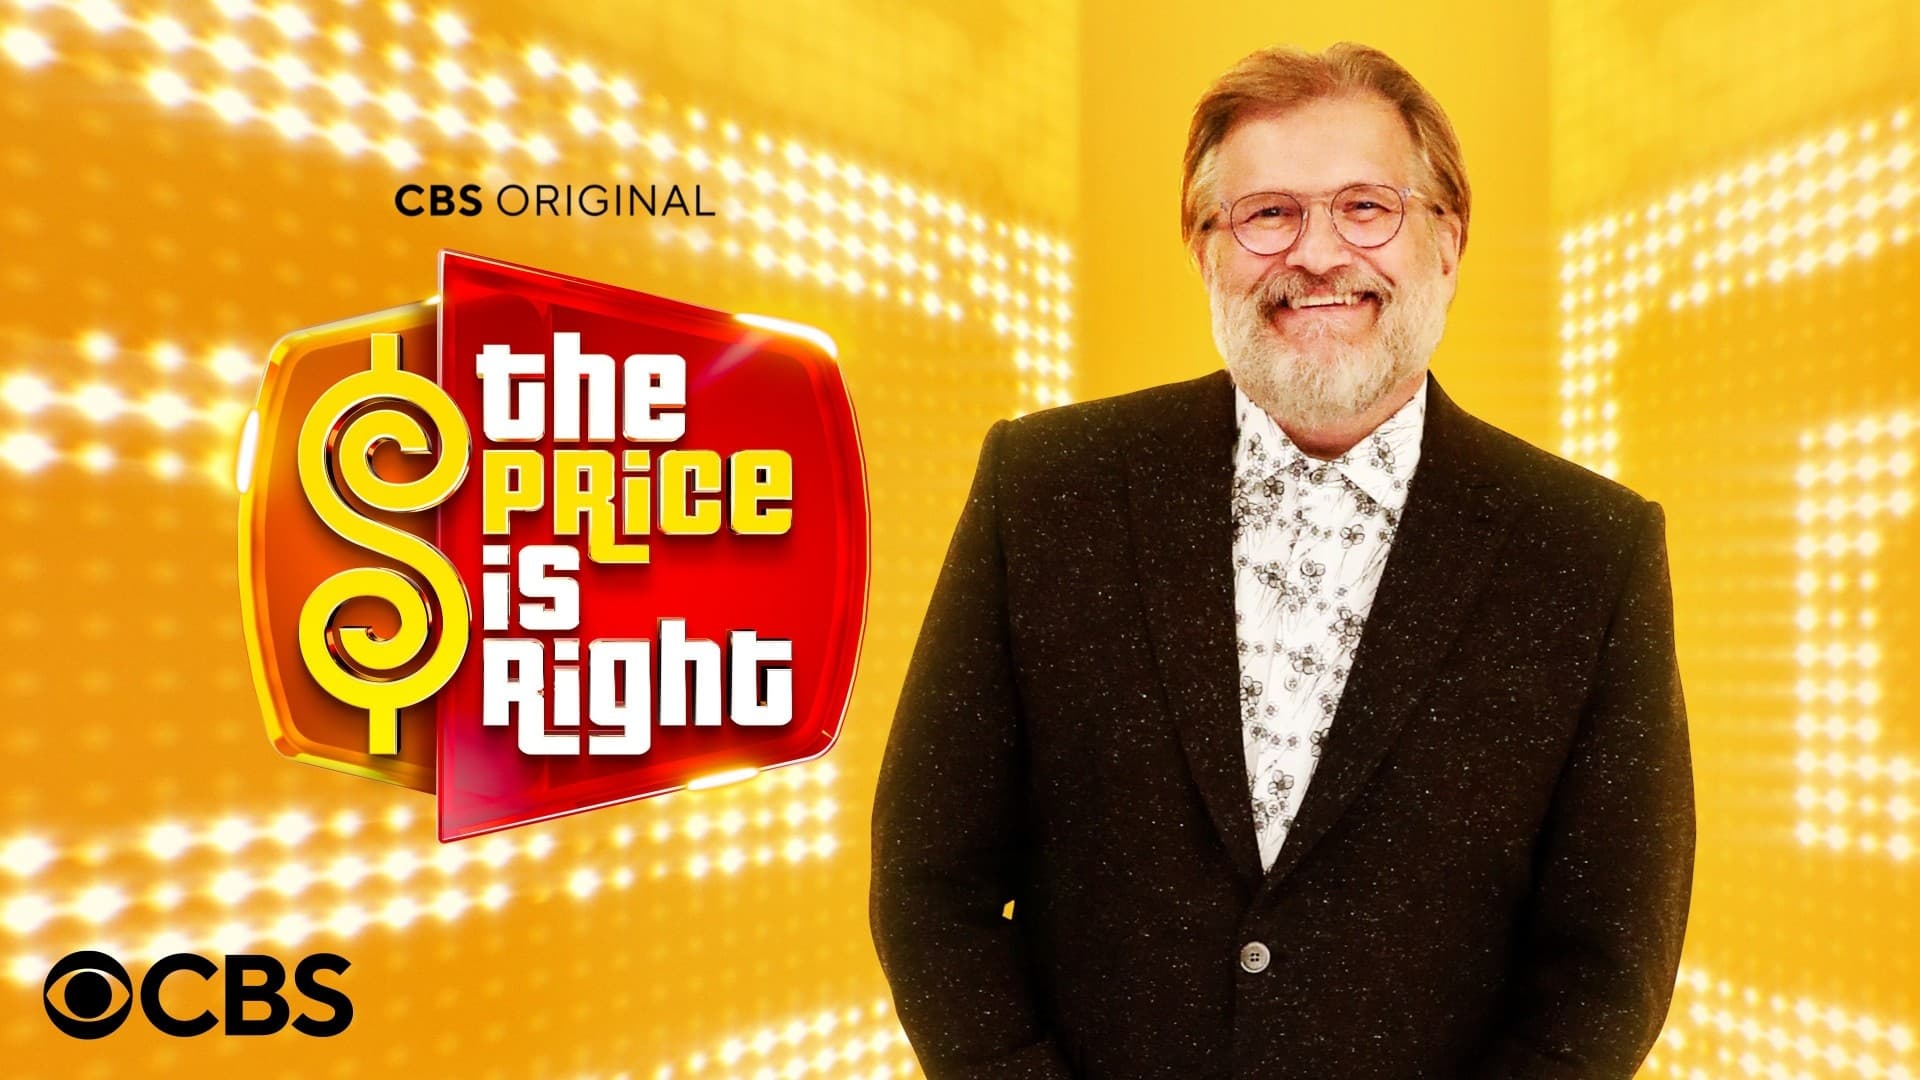 The Price Is Right - Season 3 Episode 39 : The Price Is Right Season 3 Episode 39